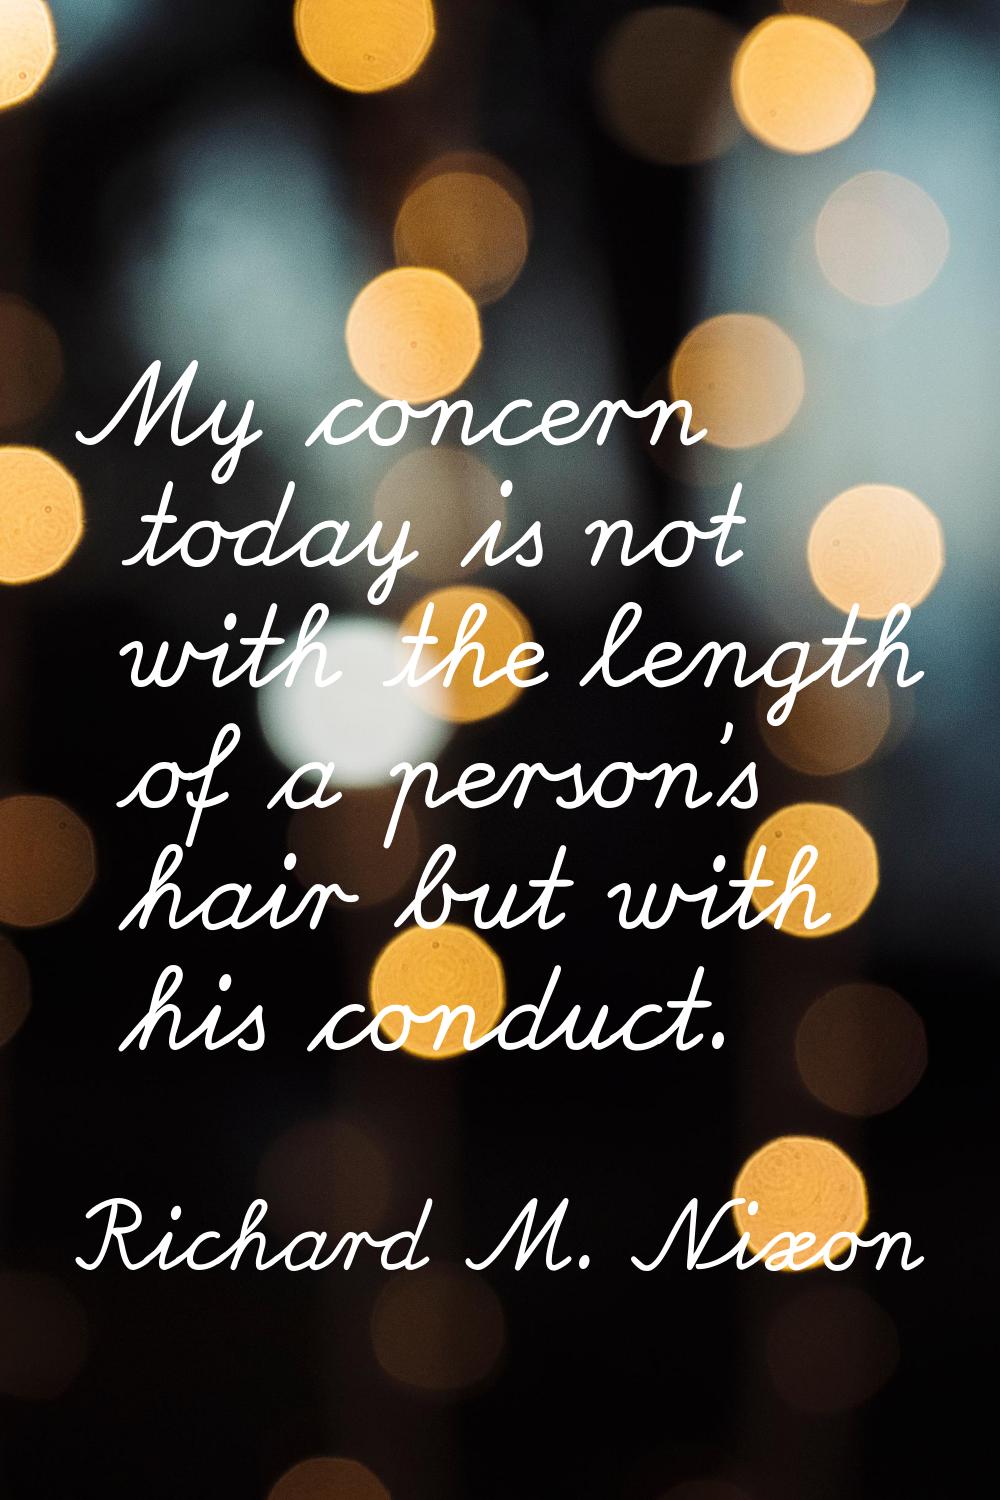 My concern today is not with the length of a person's hair but with his conduct.